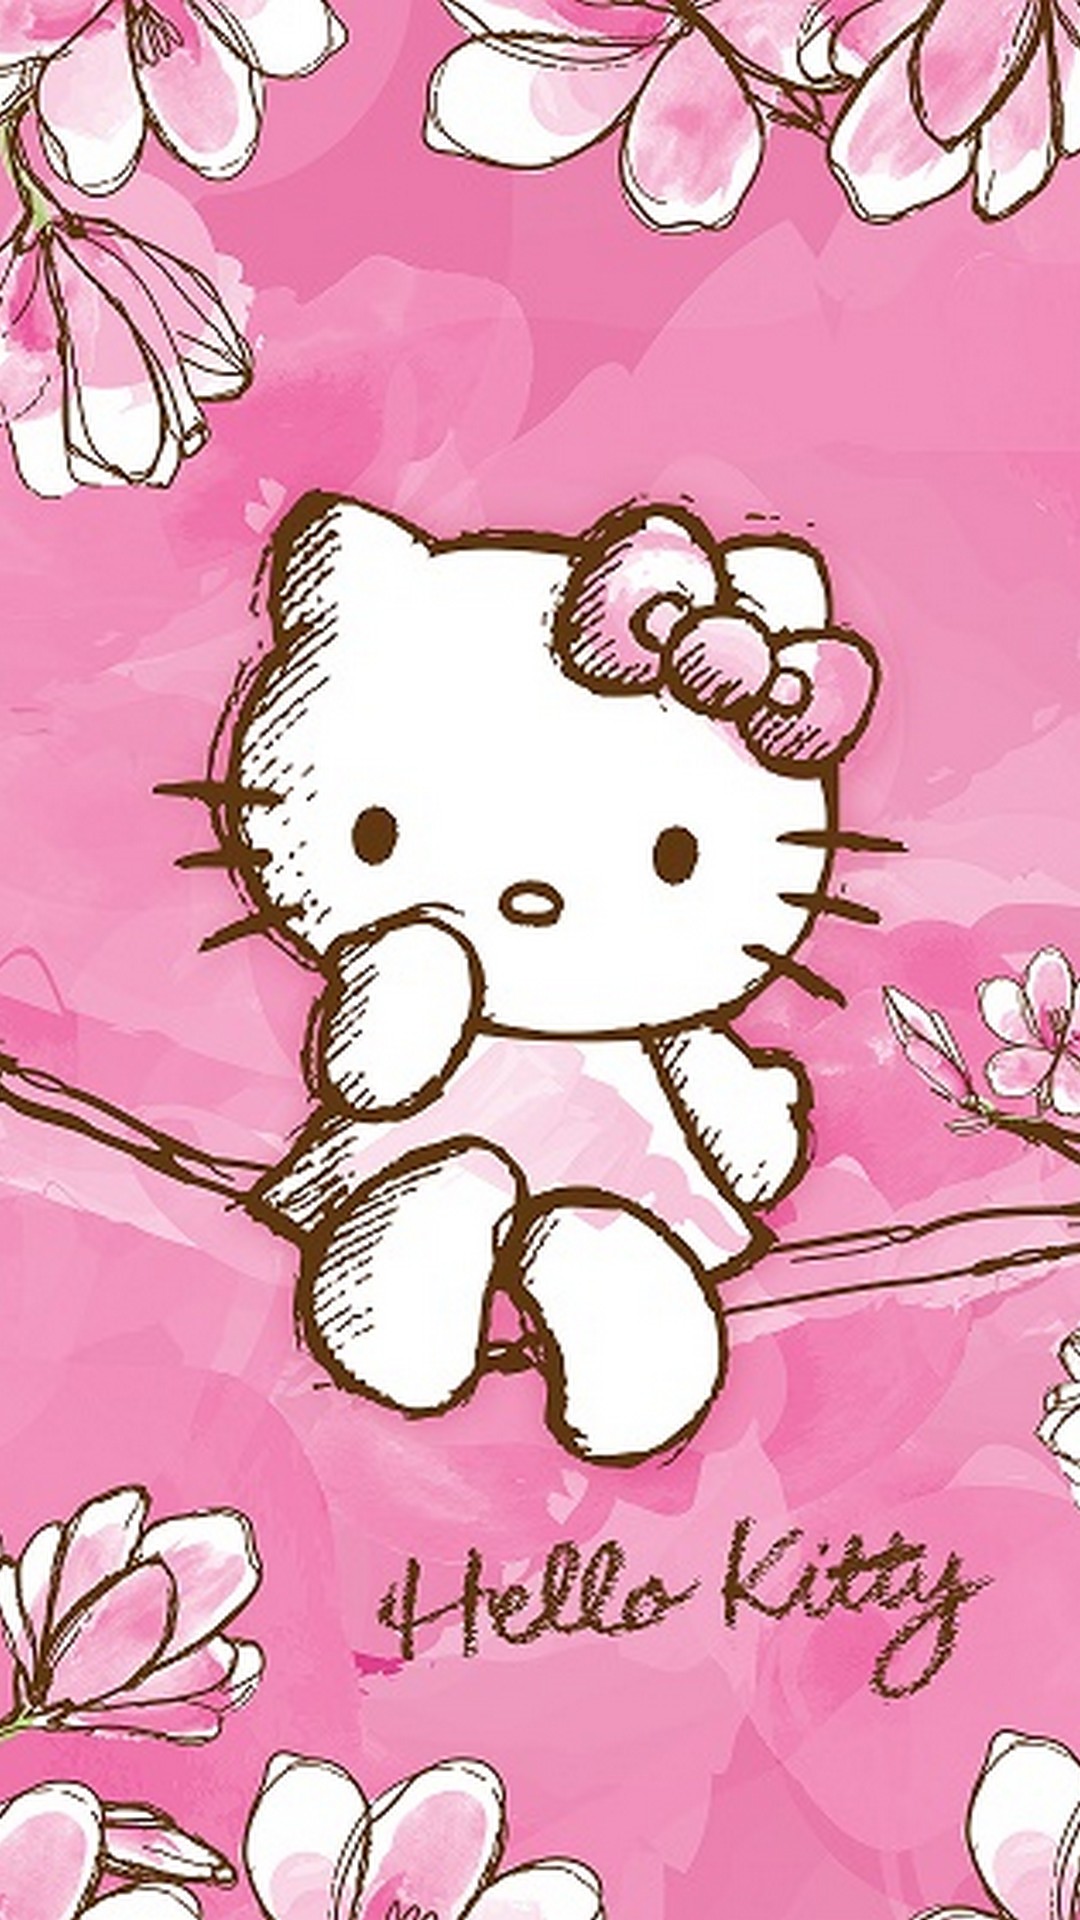 Wallpaper Hello Kitty Pictures iPhone with image resolution 1080x1920 pixel. You can make this wallpaper for your iPhone 5, 6, 7, 8, X backgrounds, Mobile Screensaver, or iPad Lock Screen